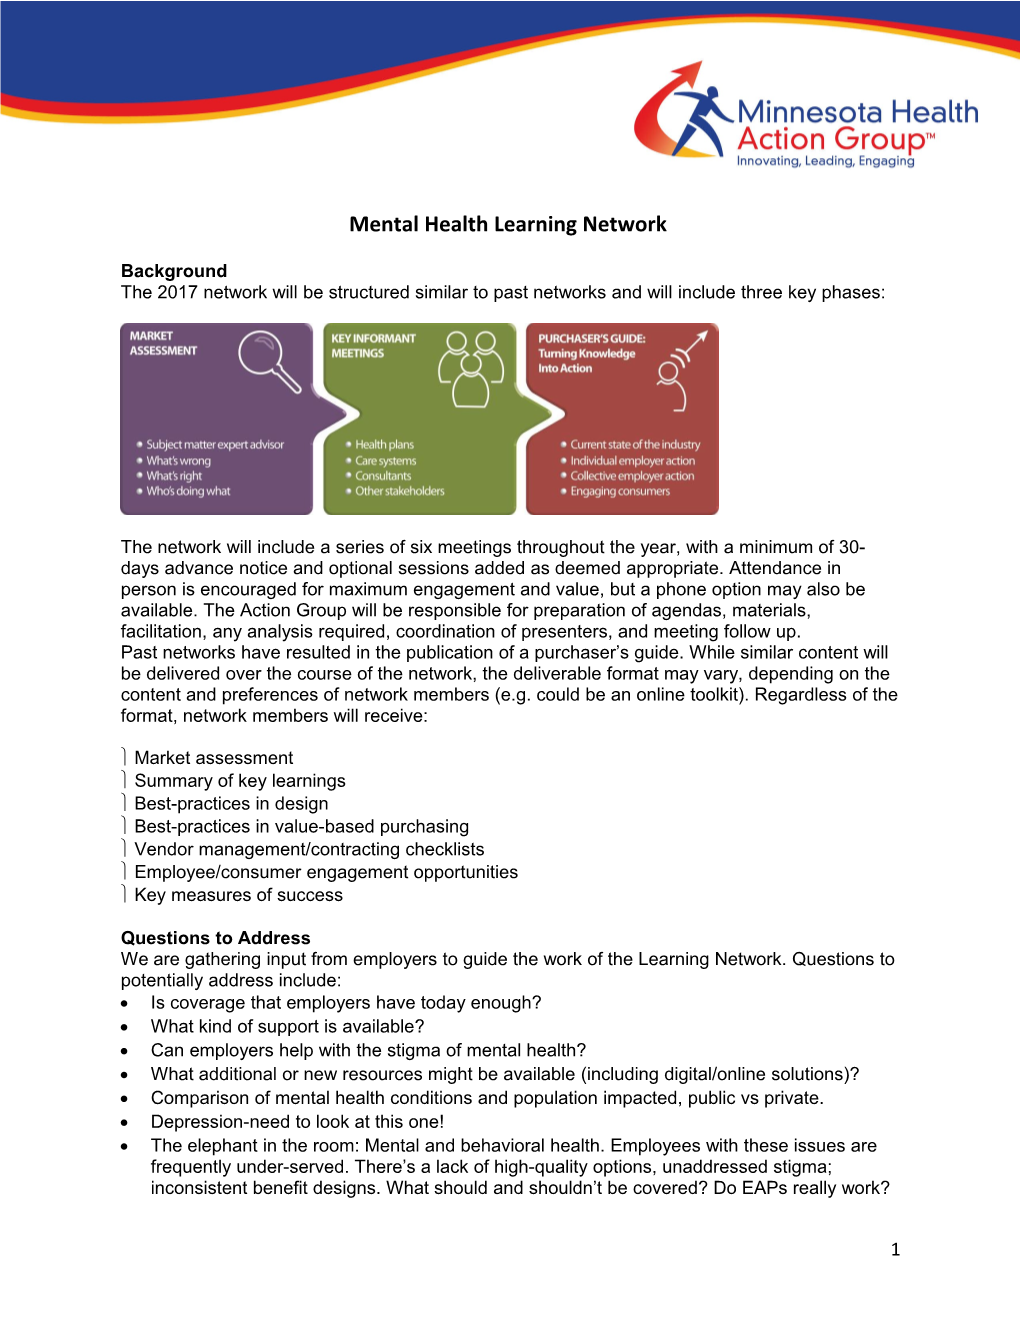 Mental Health Learning Network